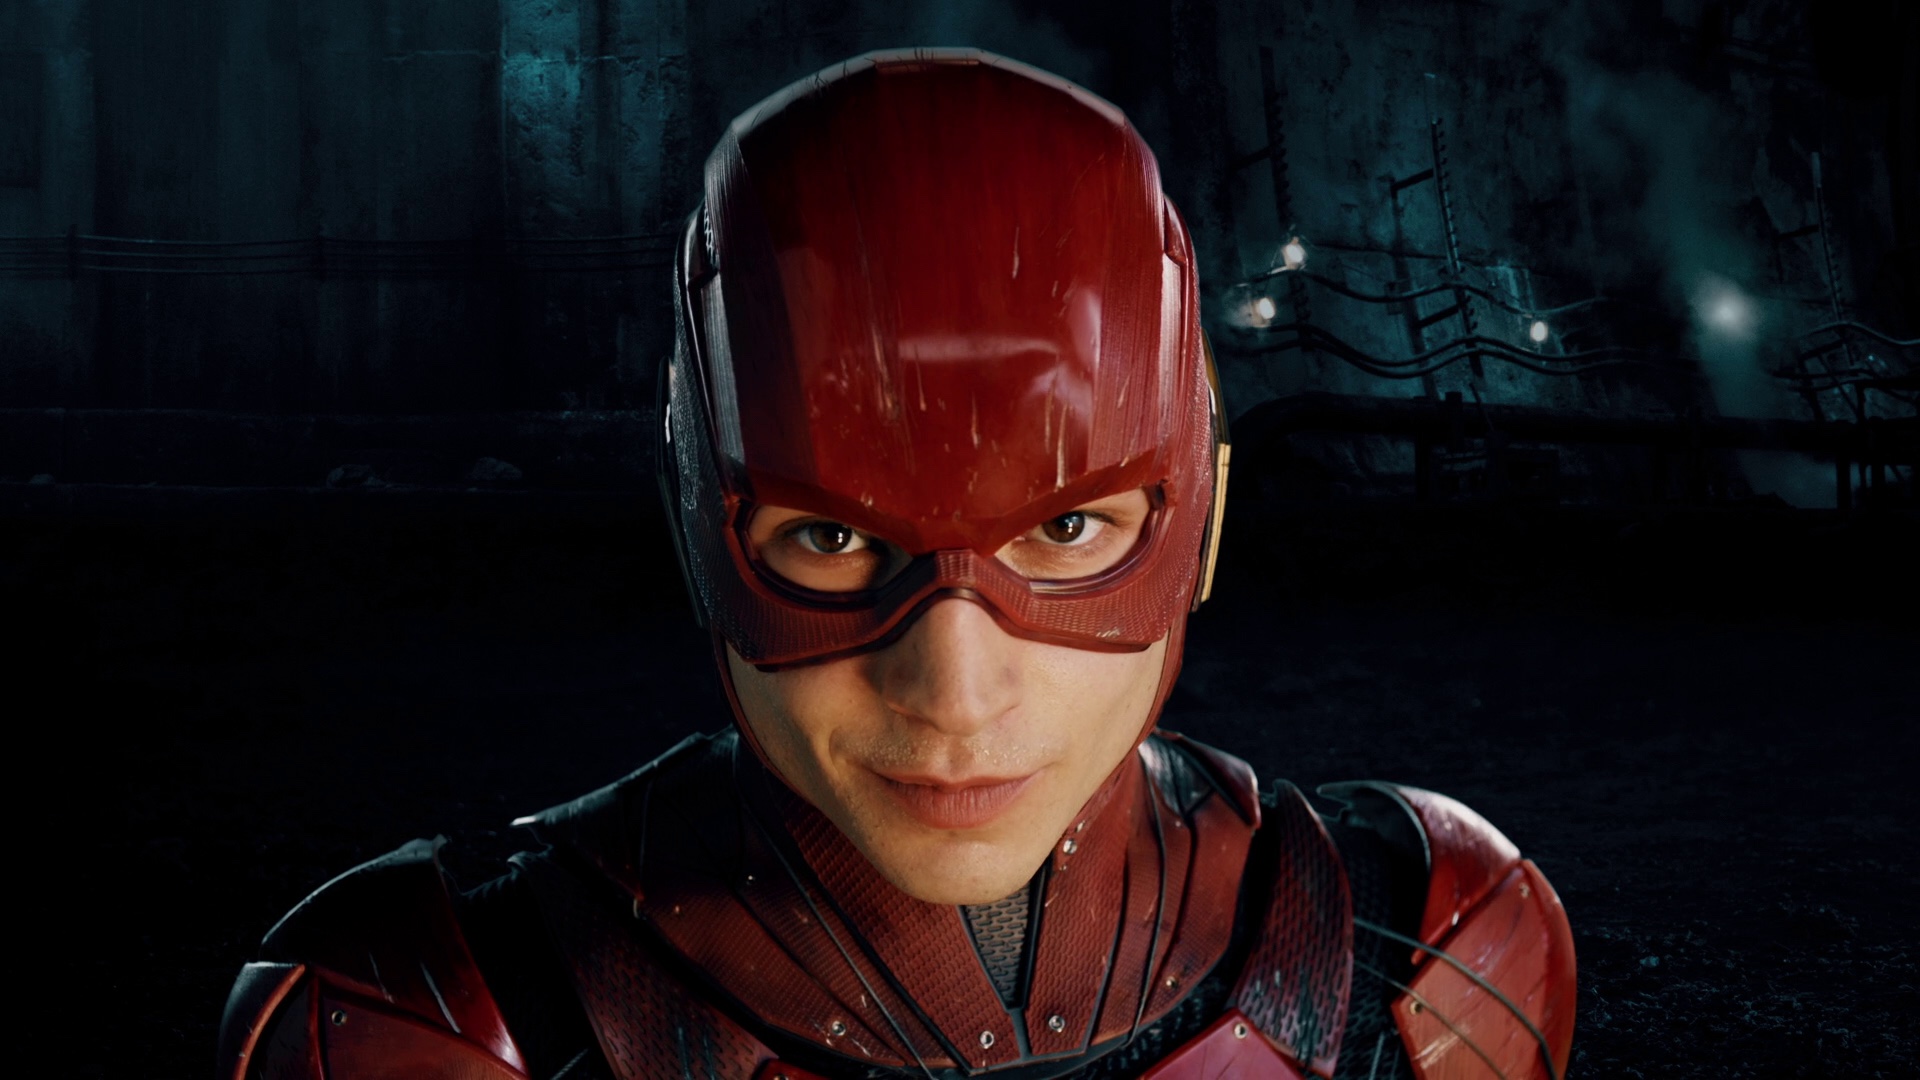 Flash movie receives new release date in 2022